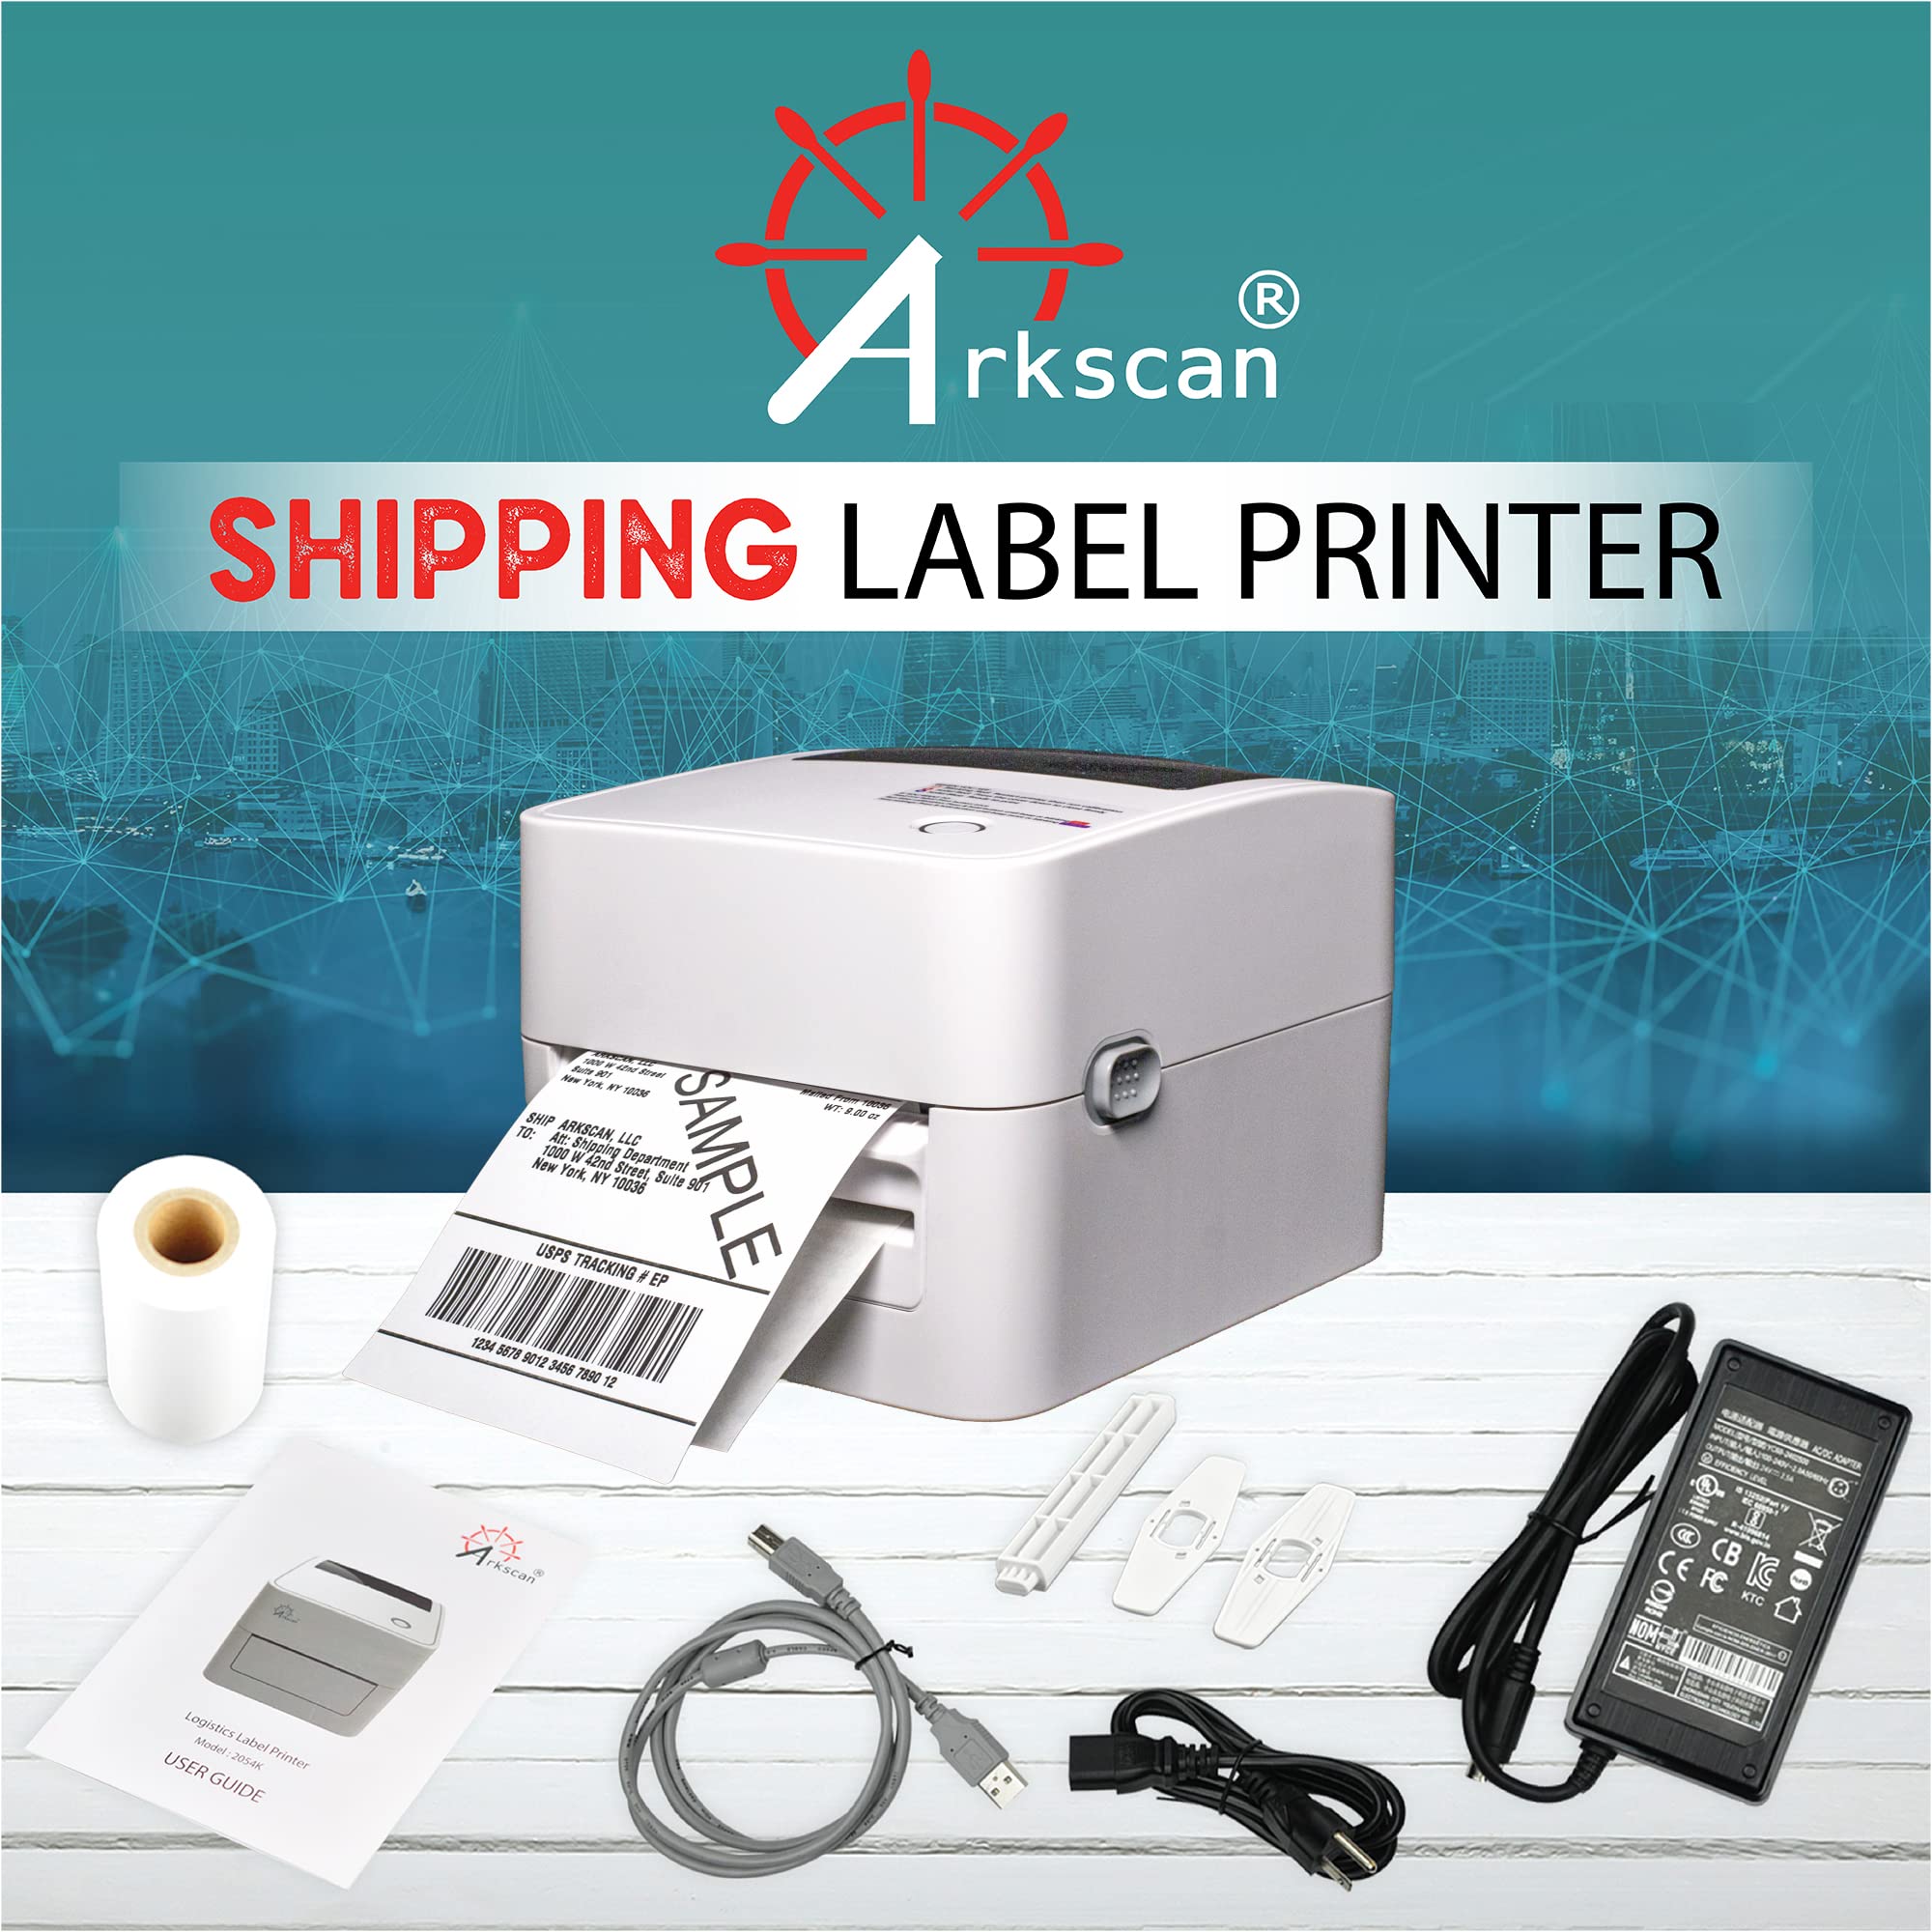 Arkscan 2054K-AP Auto Peel Shipping Label Printer, Separate Label from Backsheet Automatically, Print on Windows Mac Chromebook via USB, Print Wireless for Bluetooth on Windows ONLY, UPS USPS FedEx